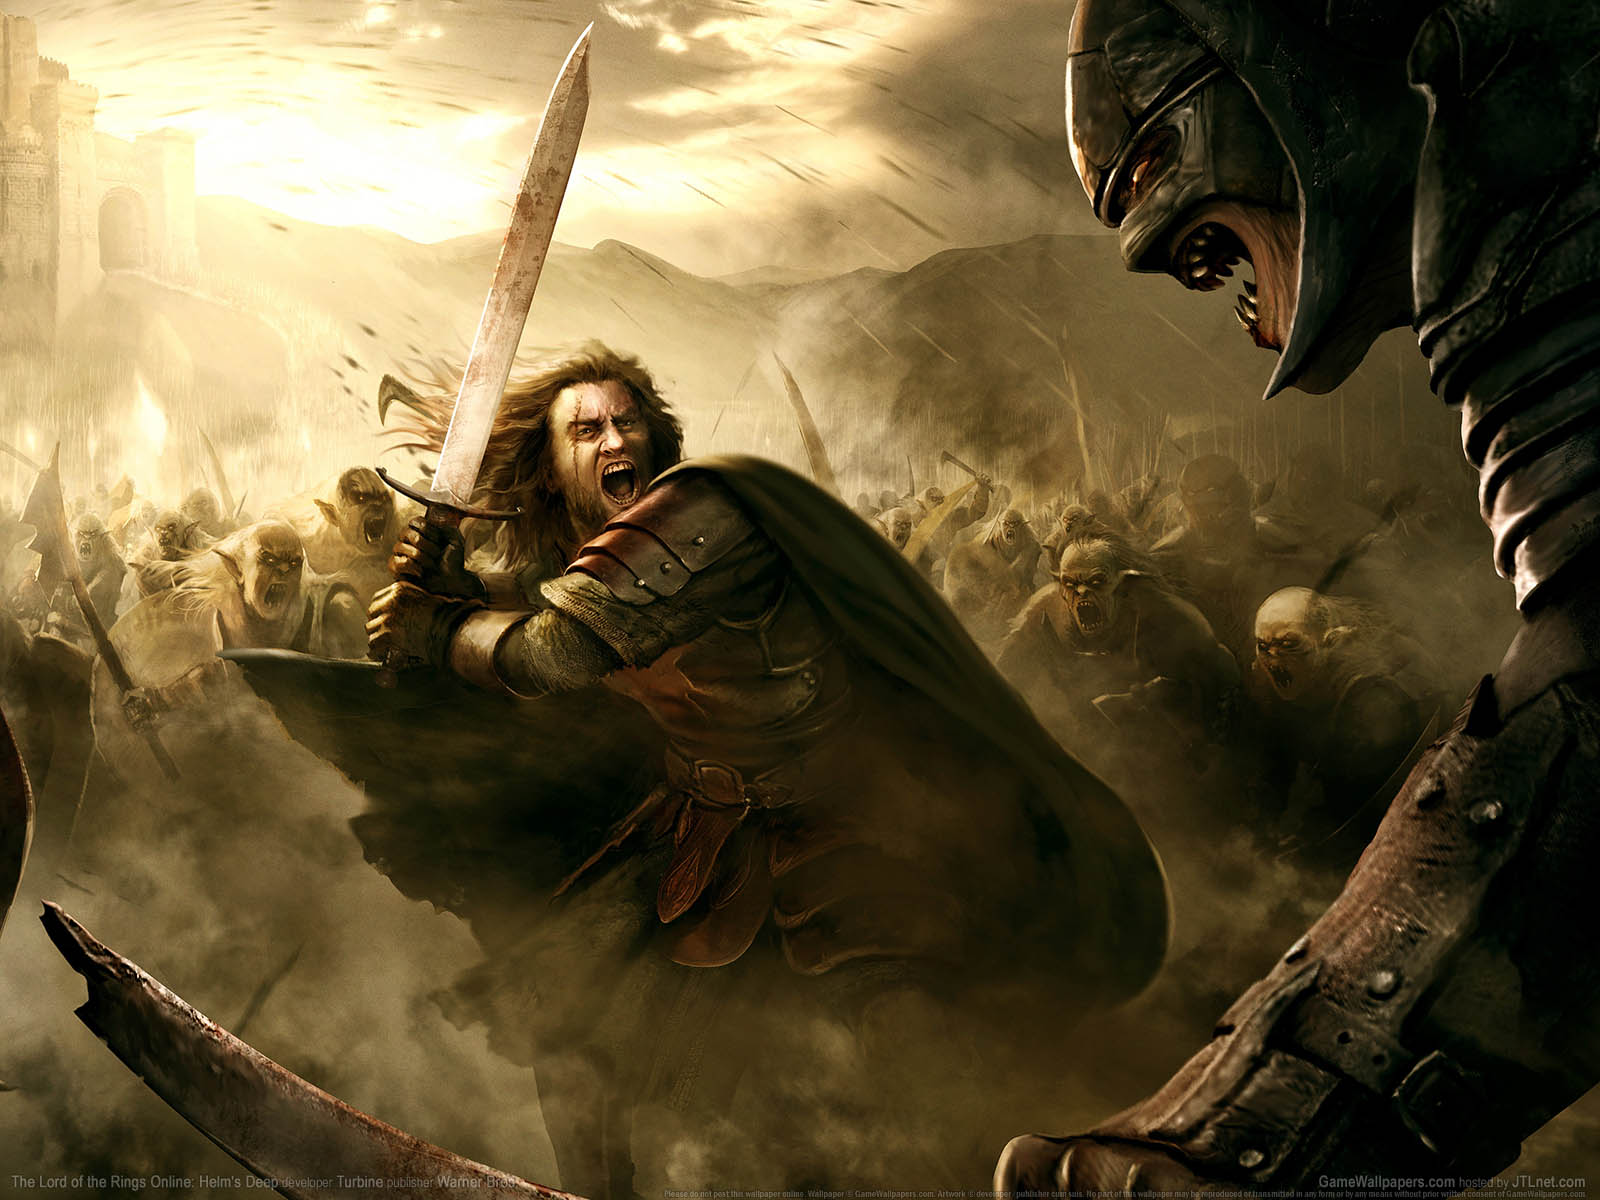 The Lord of the Rings Online: Helm's Deep wallpaper 01 1600x1200